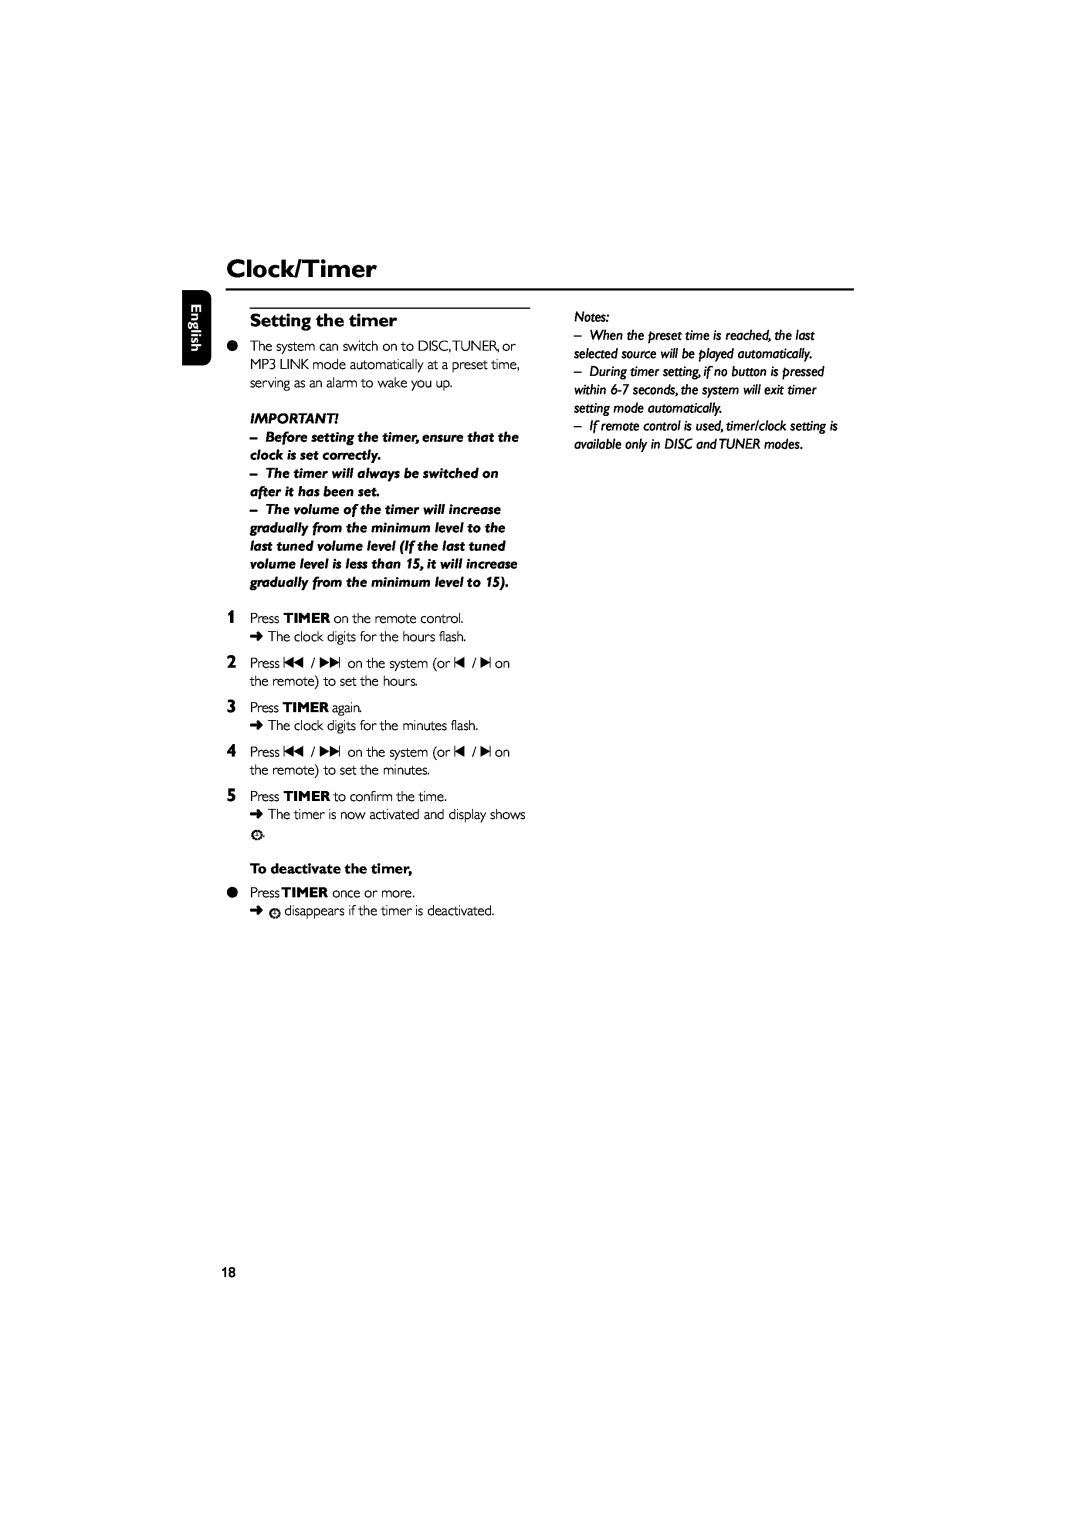 Philips FWM206 user manual Clock/Timer, Setting the timer, English, To deactivate the timer 